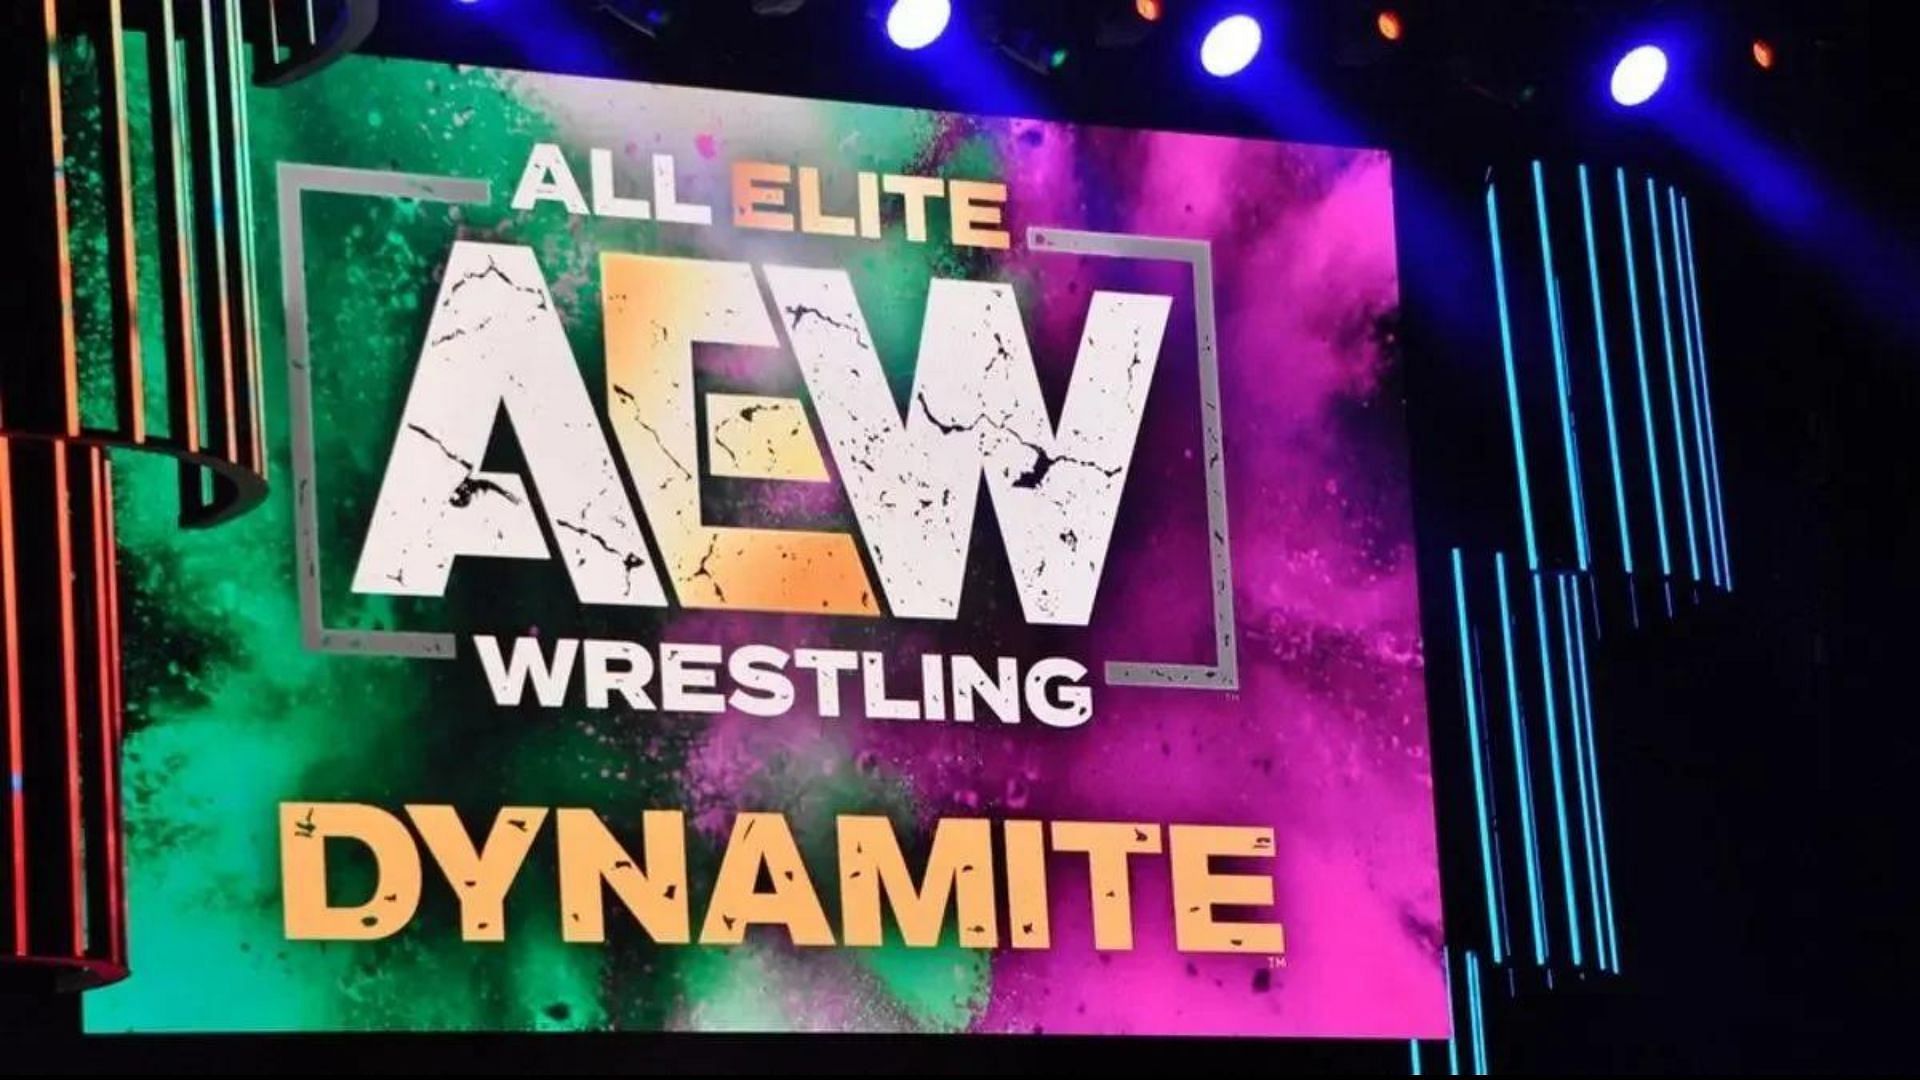 AEW Dynamite has a stacked card scheduled this week